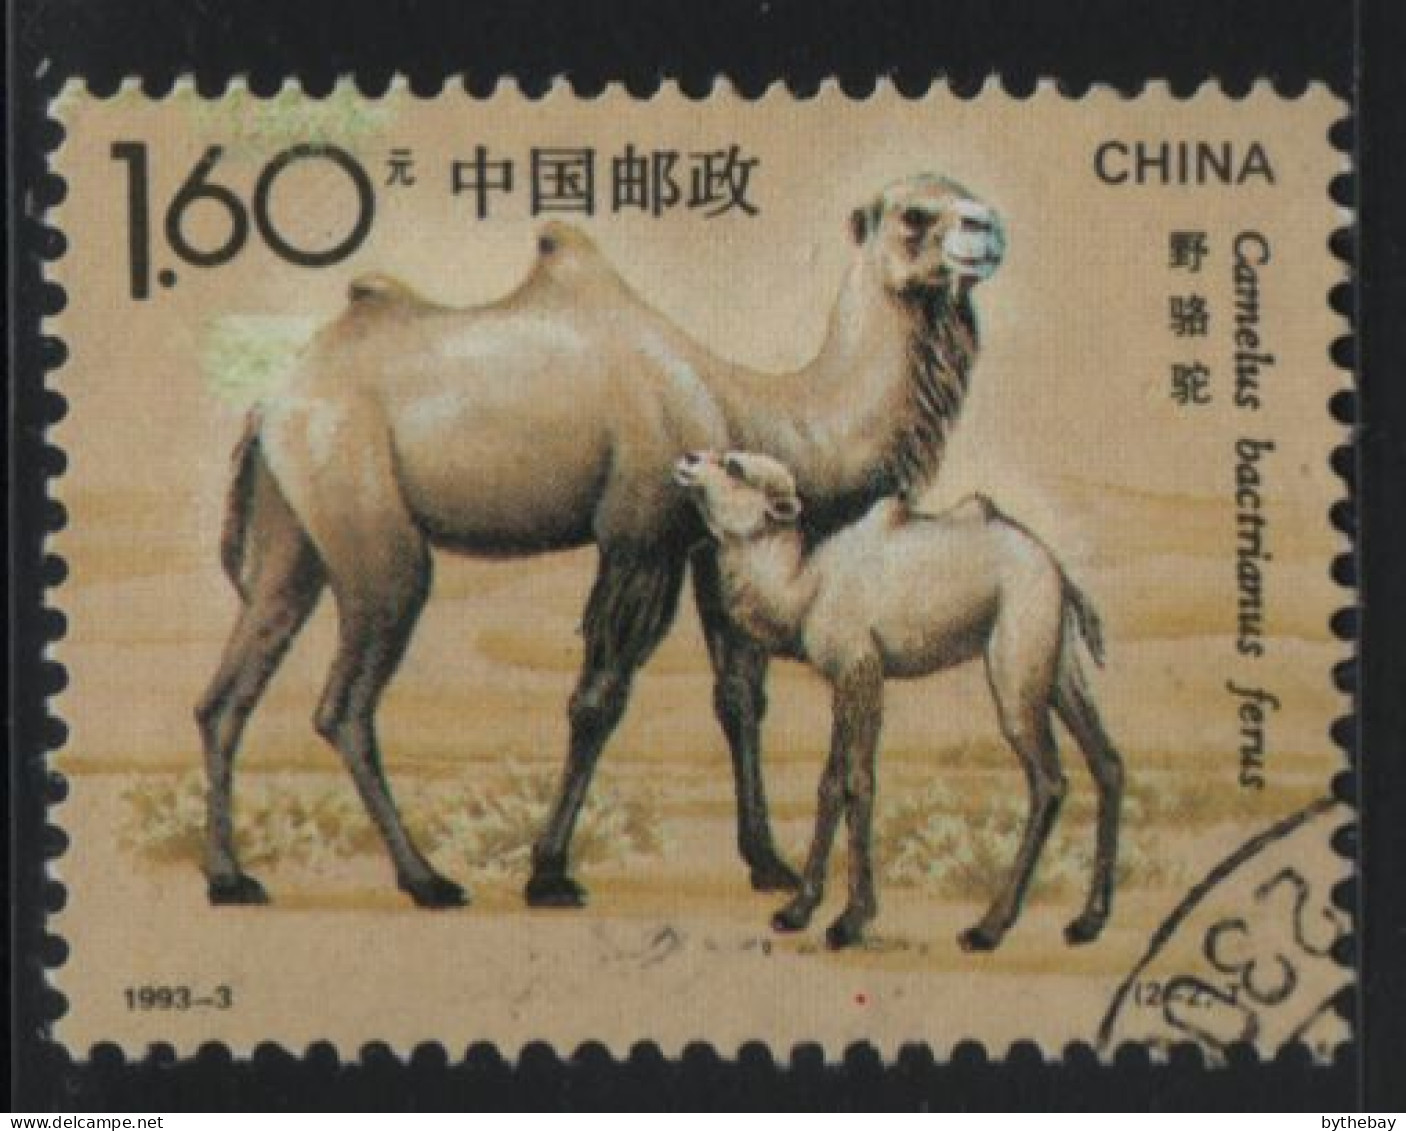 China People's Republic 1993 Used Sc 2434 $1.60 Camels - Usados